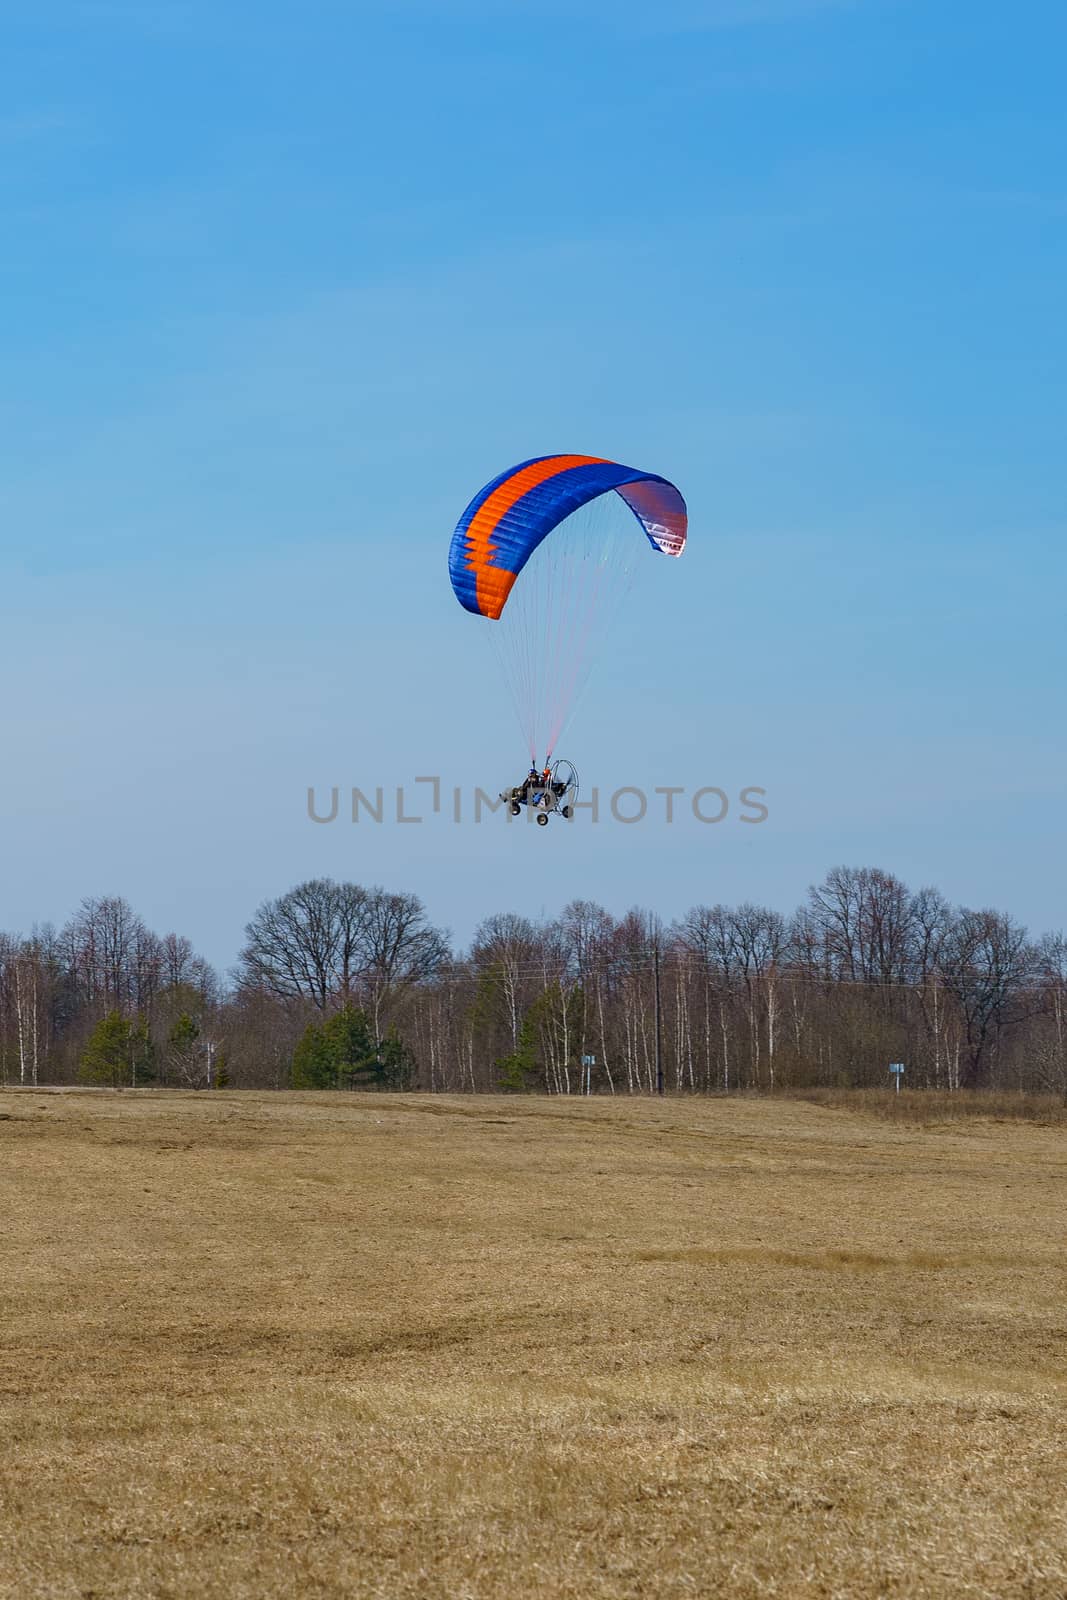 the paraglider begins to take off over the field on a sunny spring day